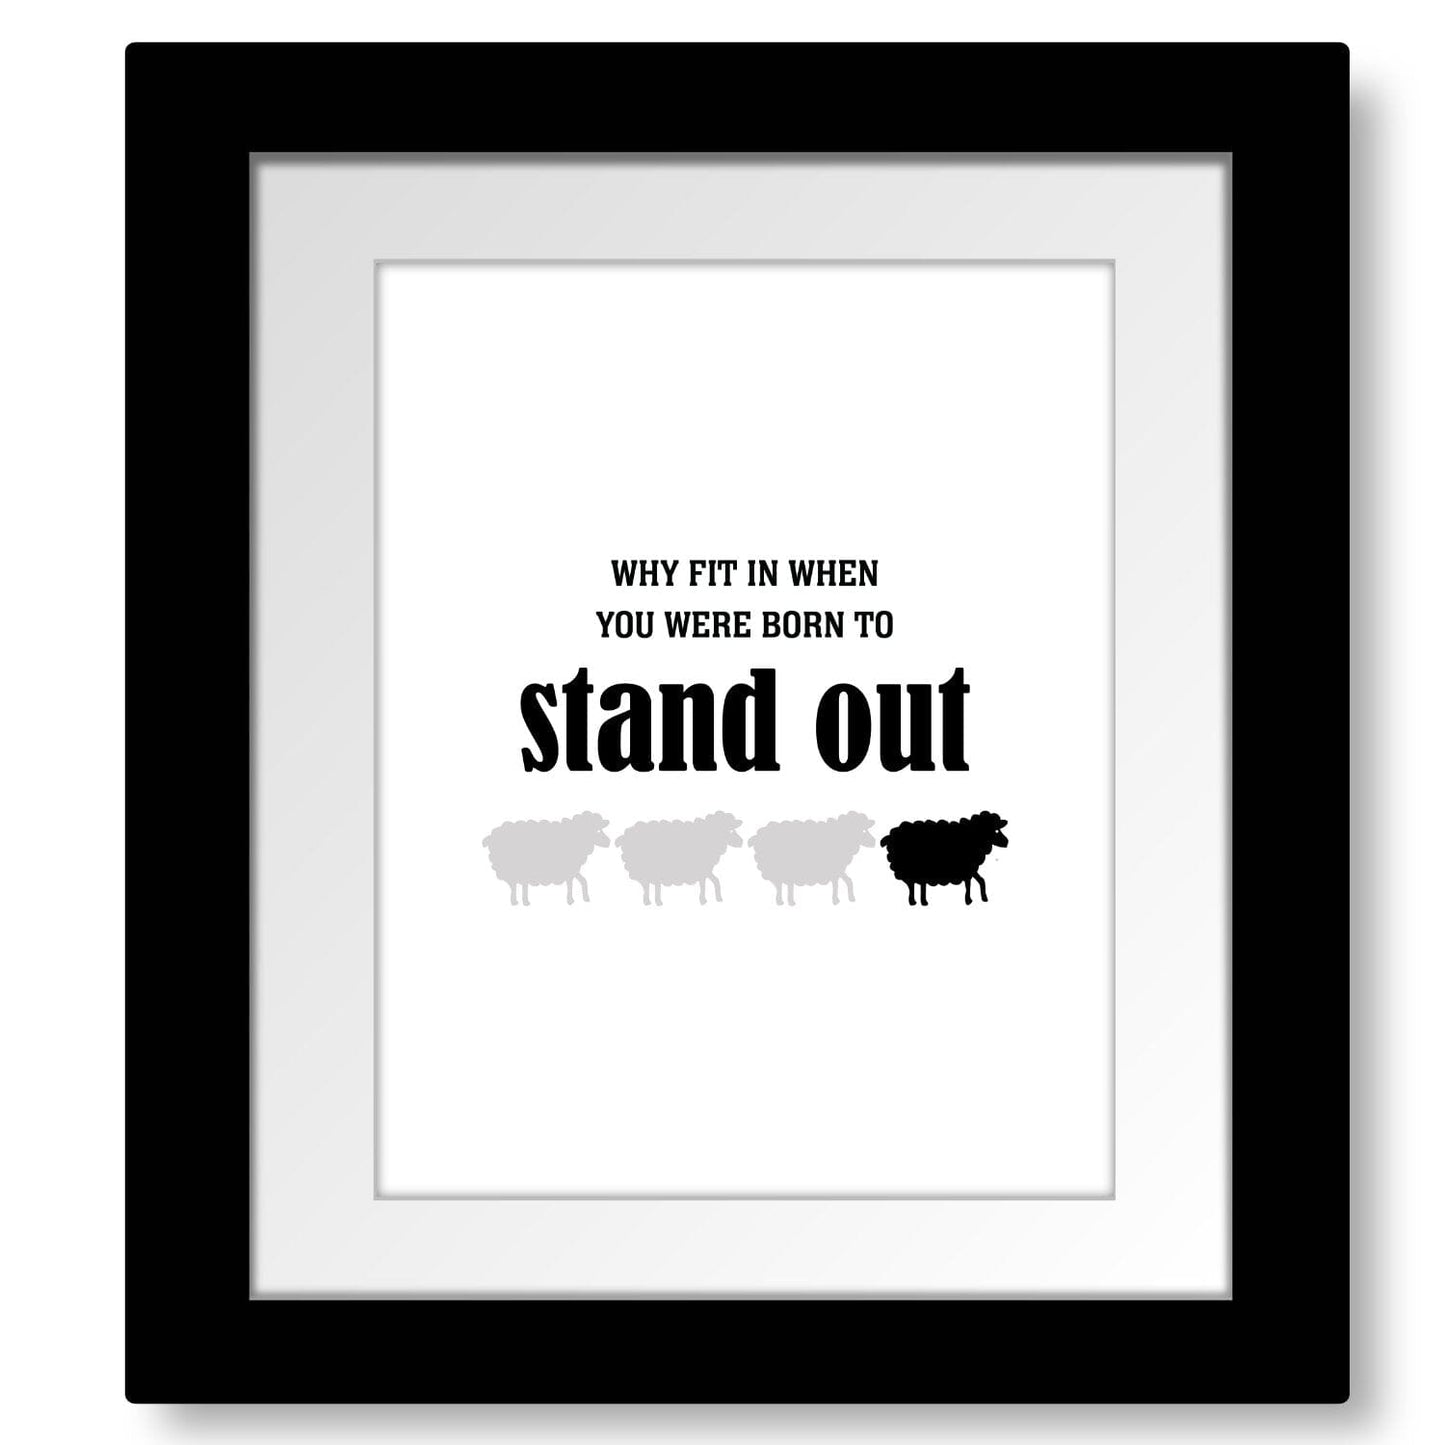 Why Fit in When You Were Born to Stand Out - Wise and Witty Print Wise and Wiseass Quotes Song Lyrics Art 8x10 Framed and Matted Print 